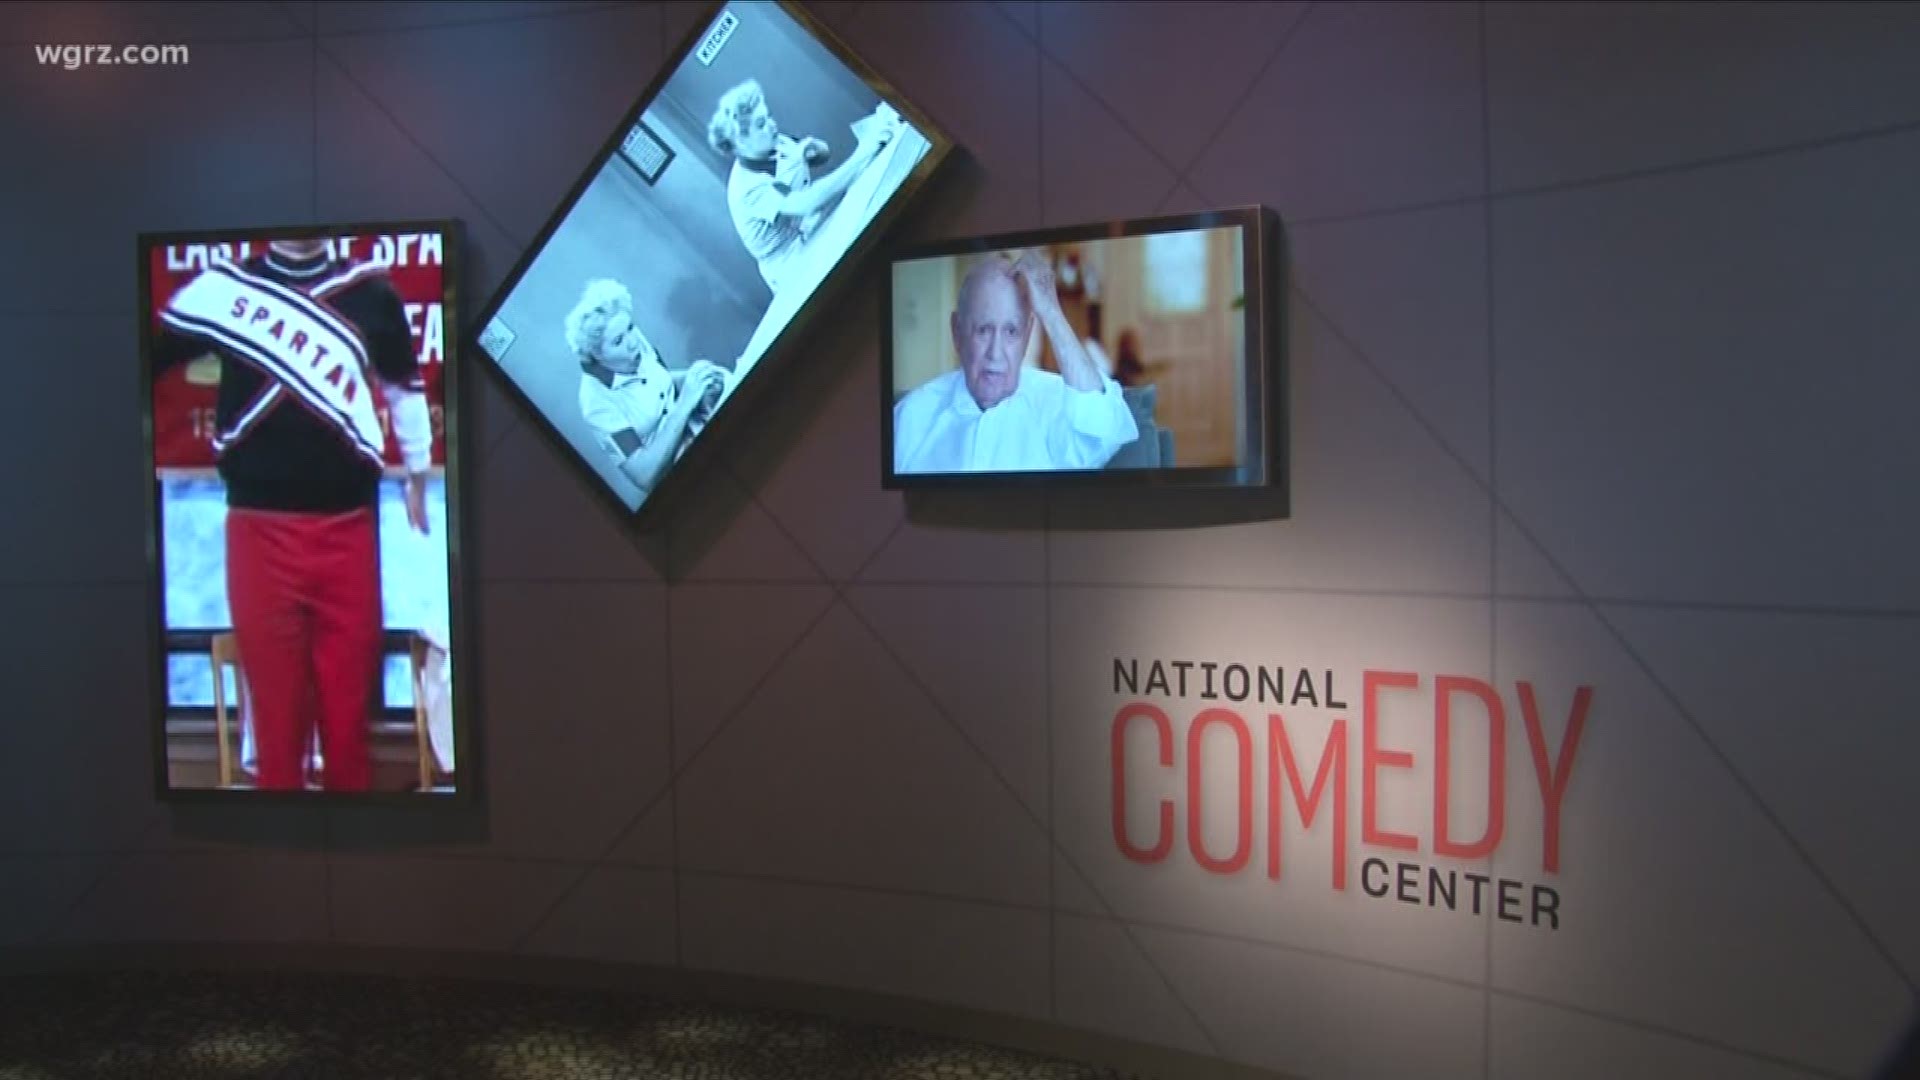 National Comedy Center opens today